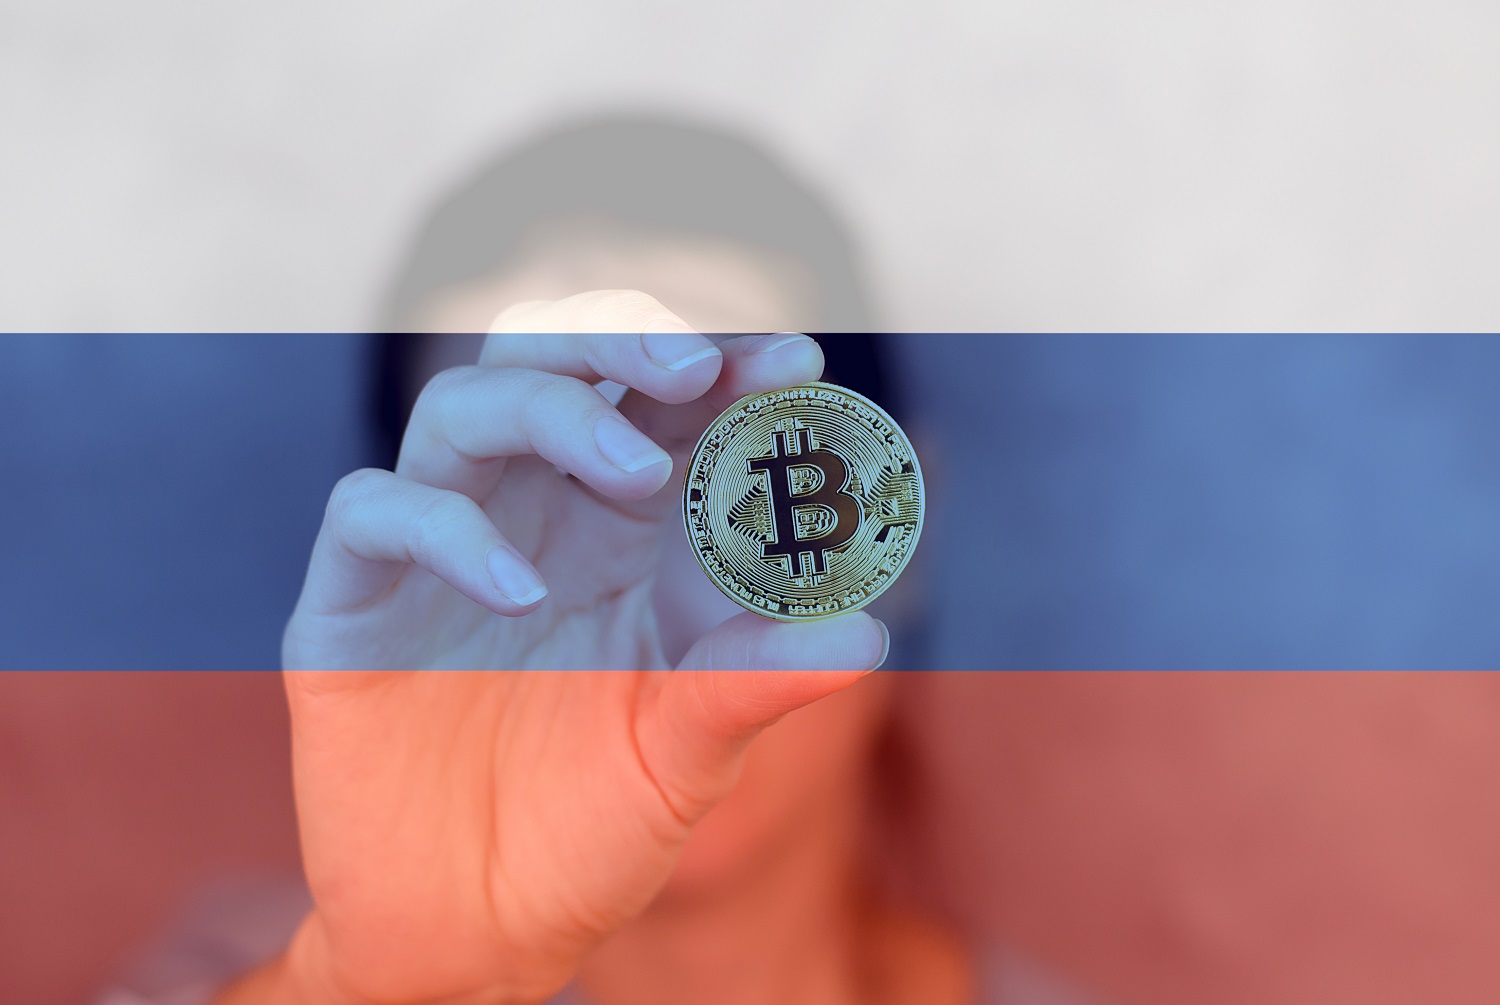 A person holds a metal token intended to represent Bitcoin against the backdrop of the Russian flag.